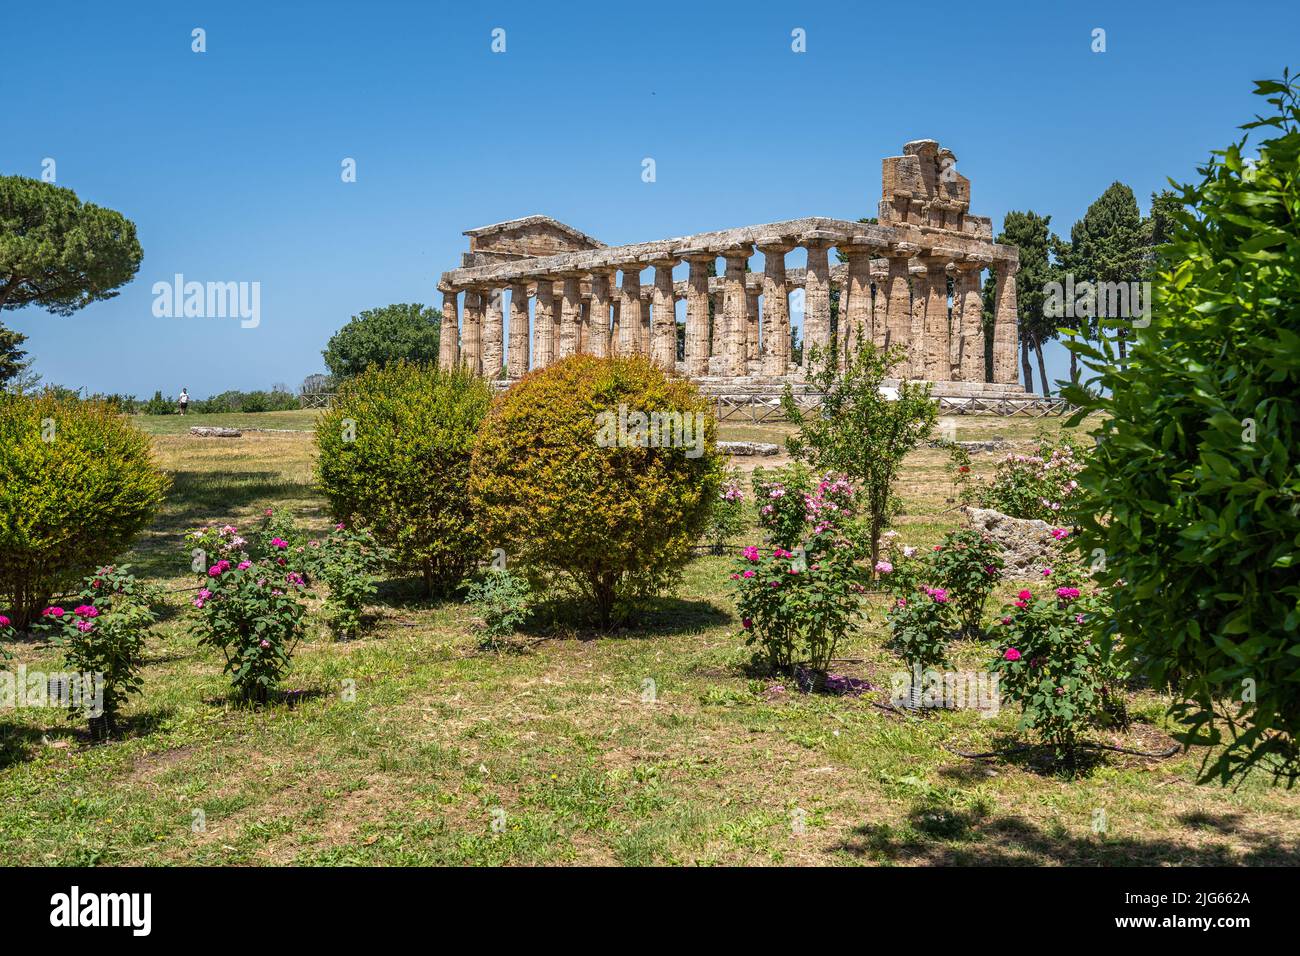 Ancient doric Temple of Athena at the ancient Greek city of Paestum, Campania, Italy Stock Photo